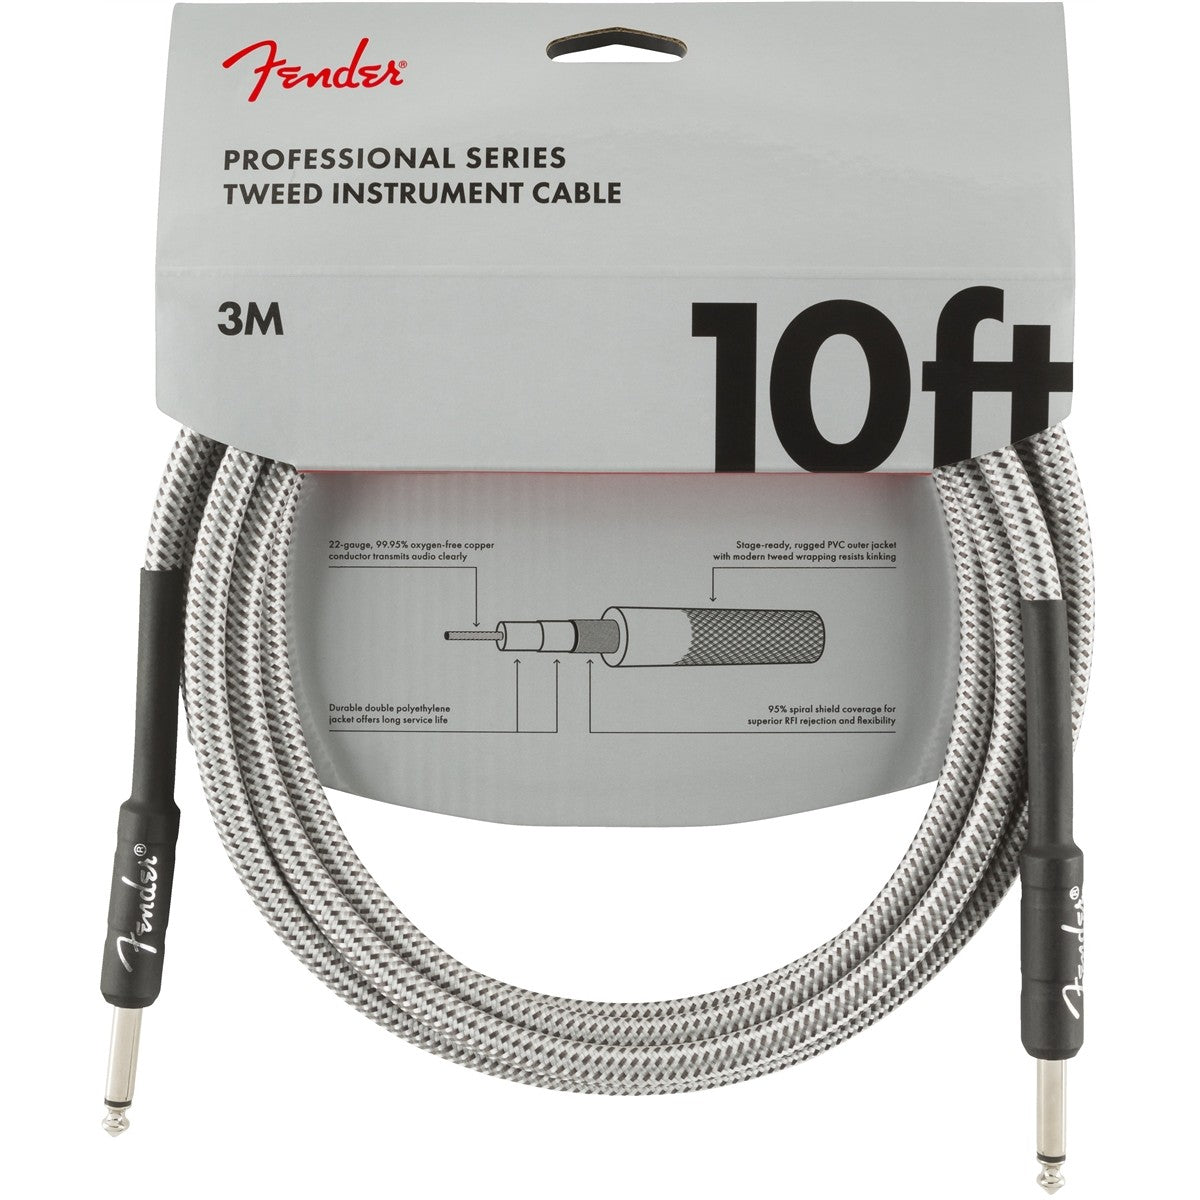 Dây Cáp Kết Nối Fender Professional Series Tweed Instrument Cable - Việt Music